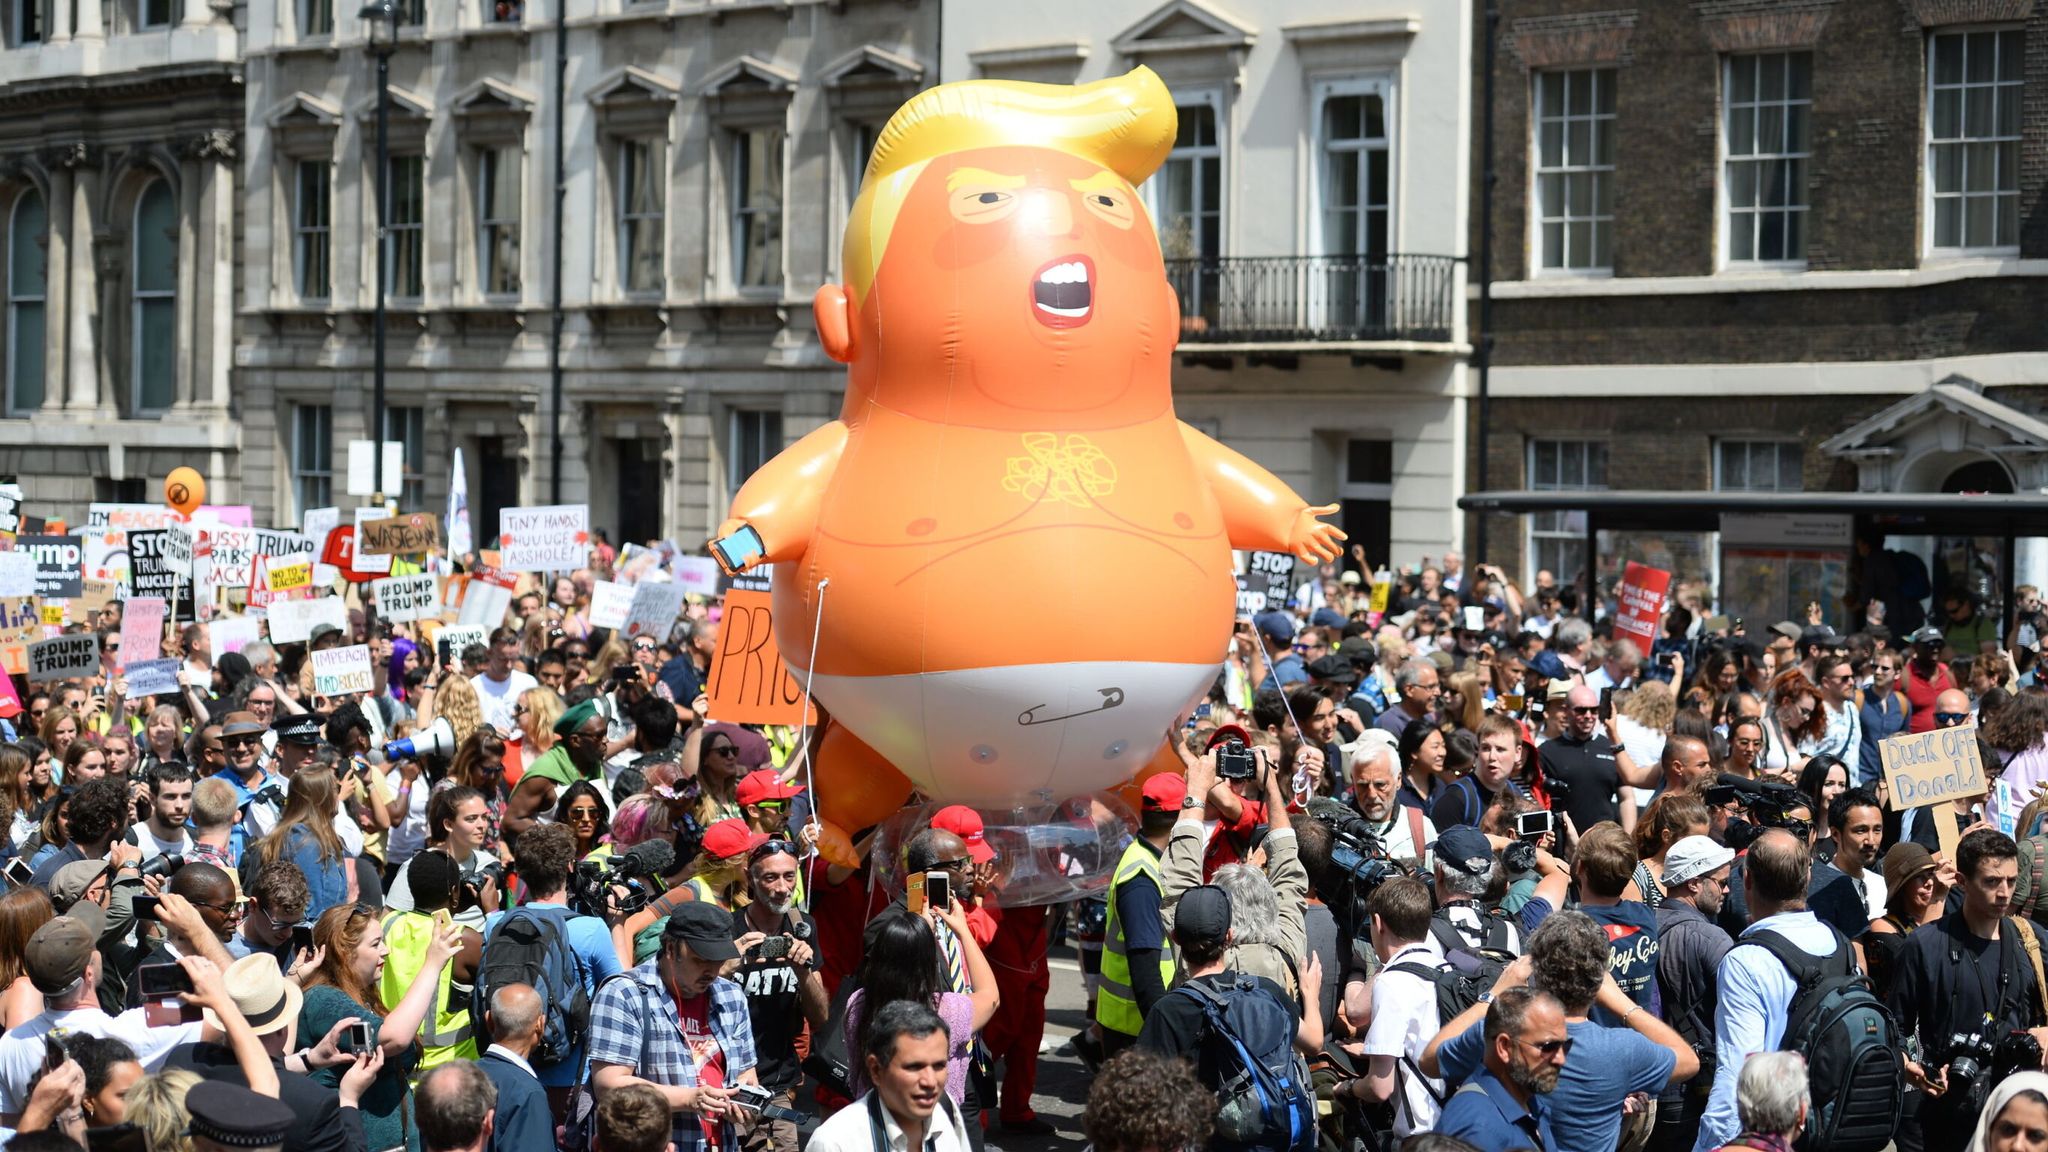 Donald Trump baby blimp re-inflated by London museum in an attempt to preserve it for years to come